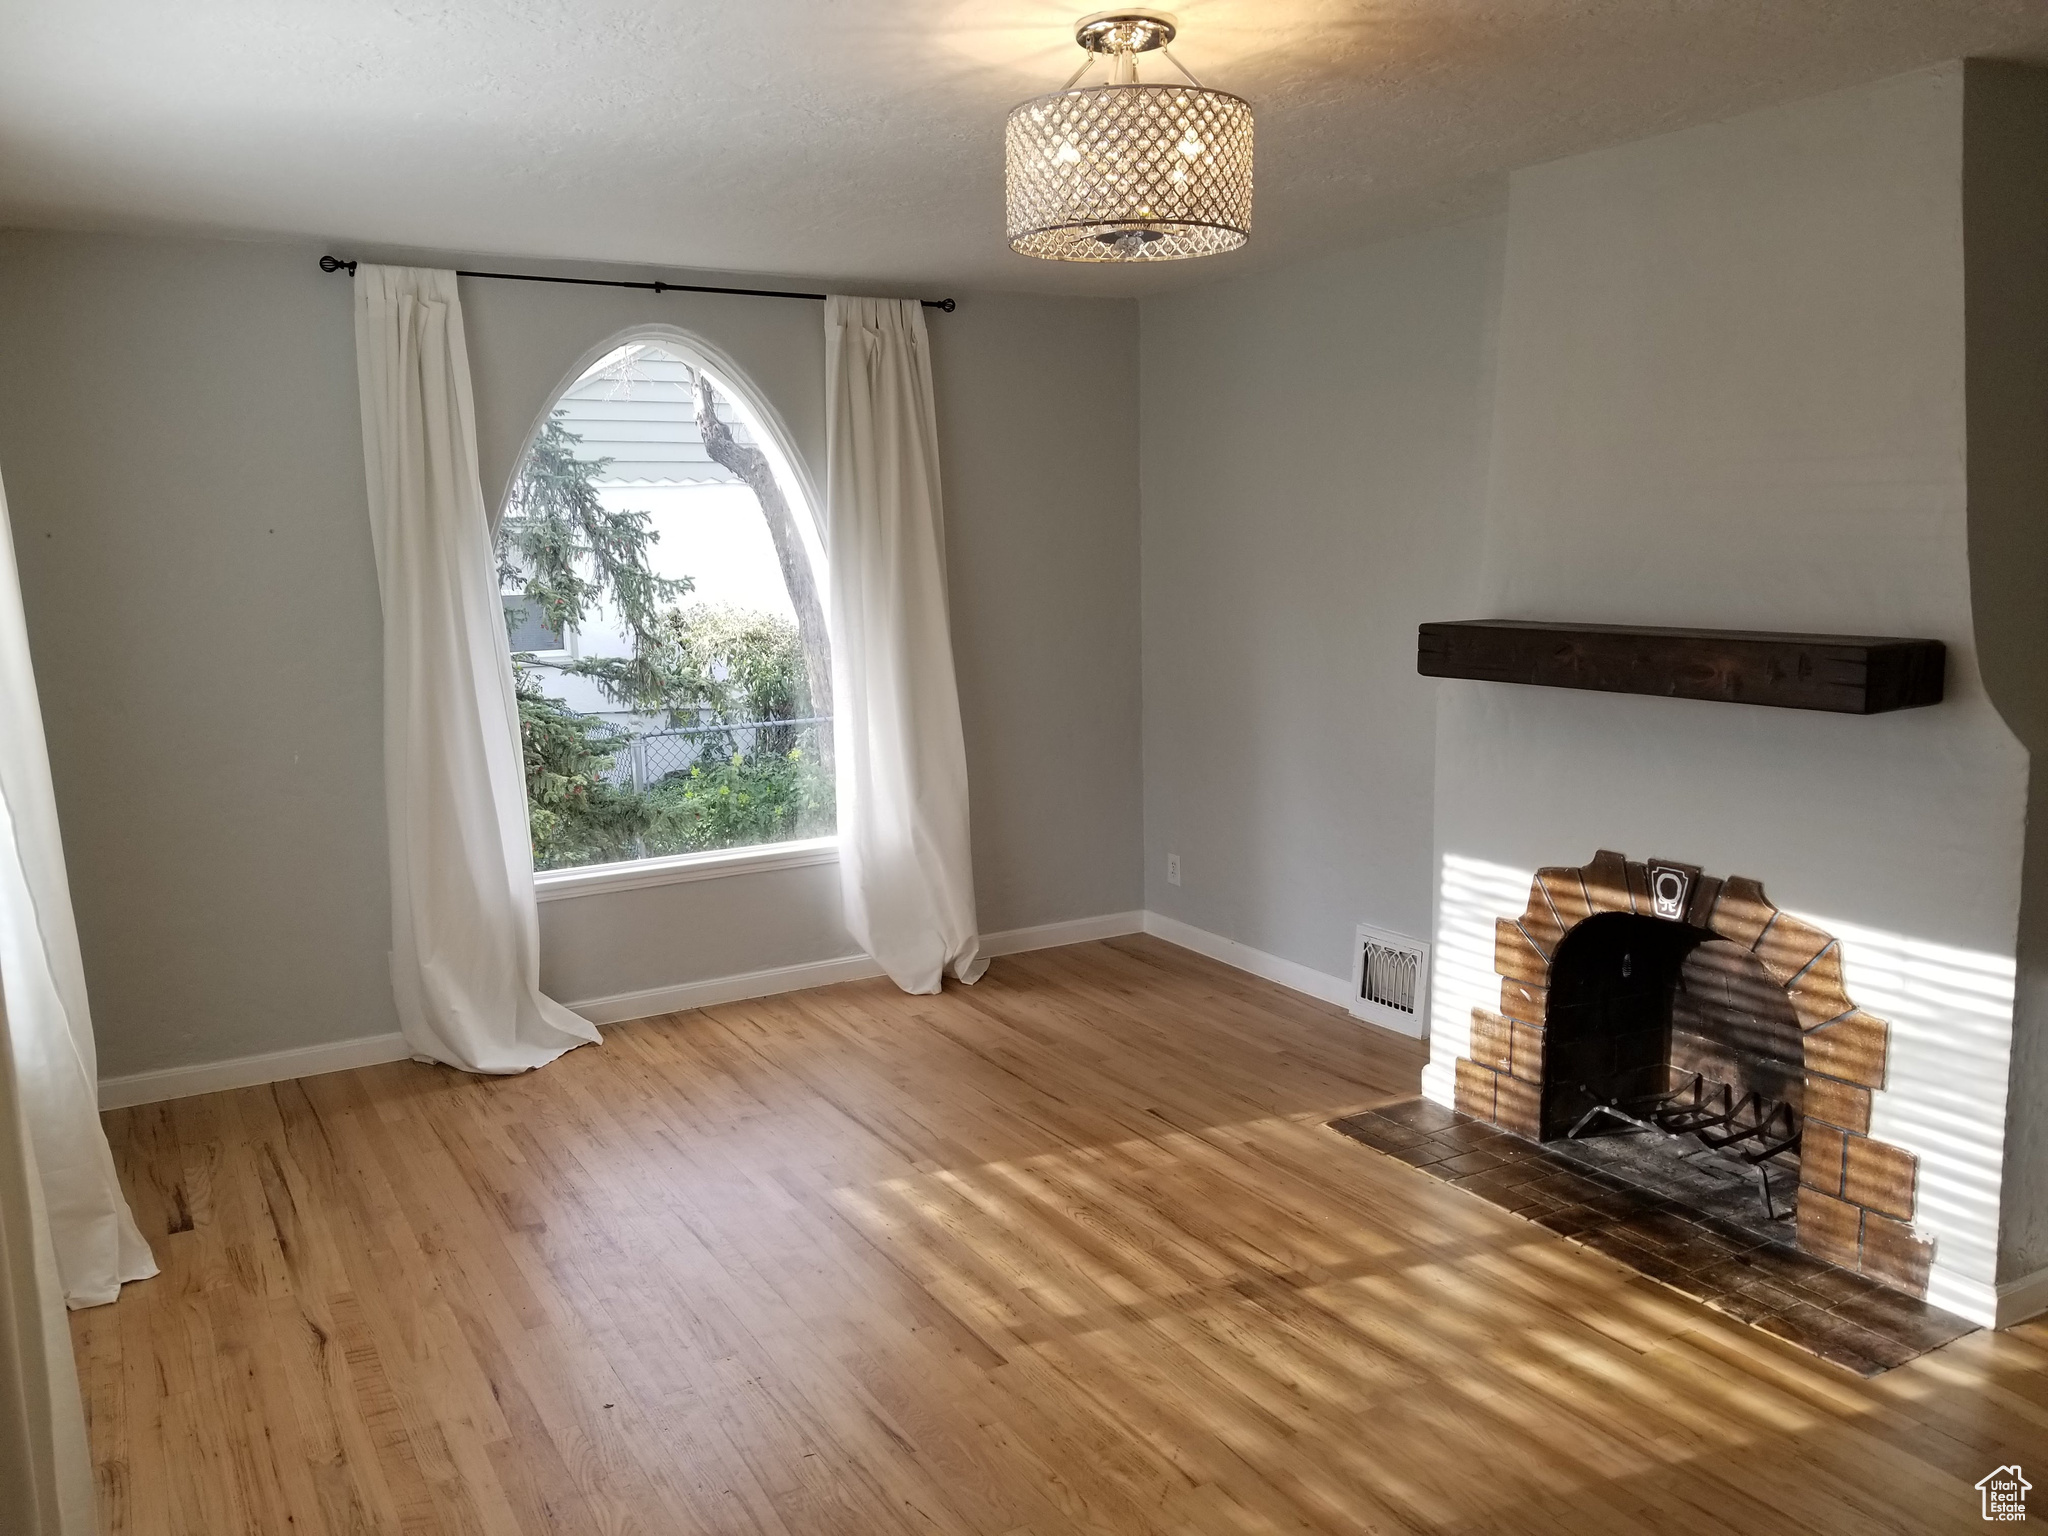 Unfurnished living room with a brick fireplace and light wood-type flooring